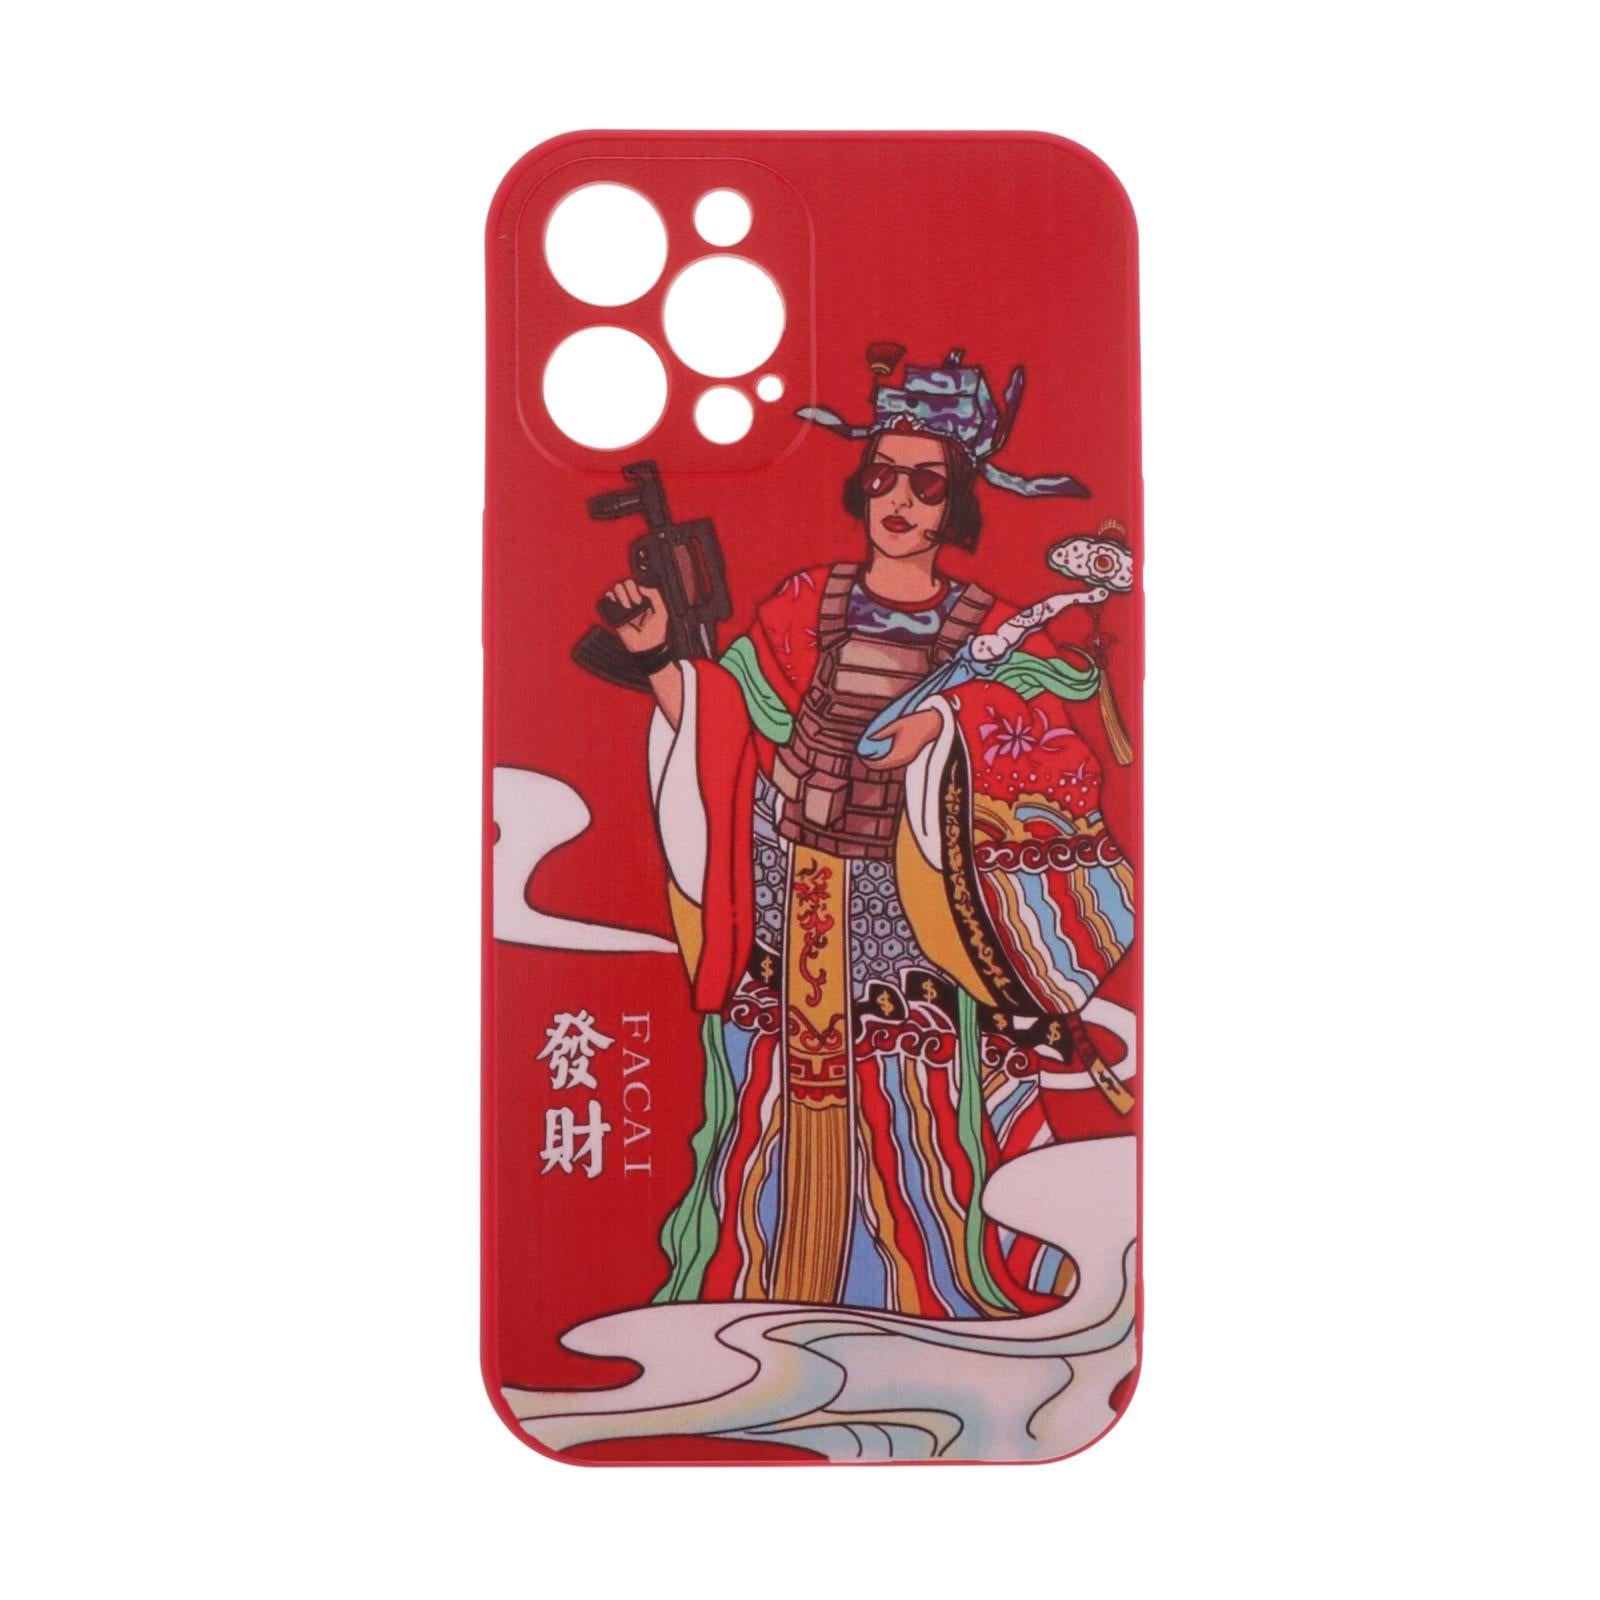 Chinese TPU  Phone Case for Iphone 12 Mini Pro Max A For iphone 12 pro